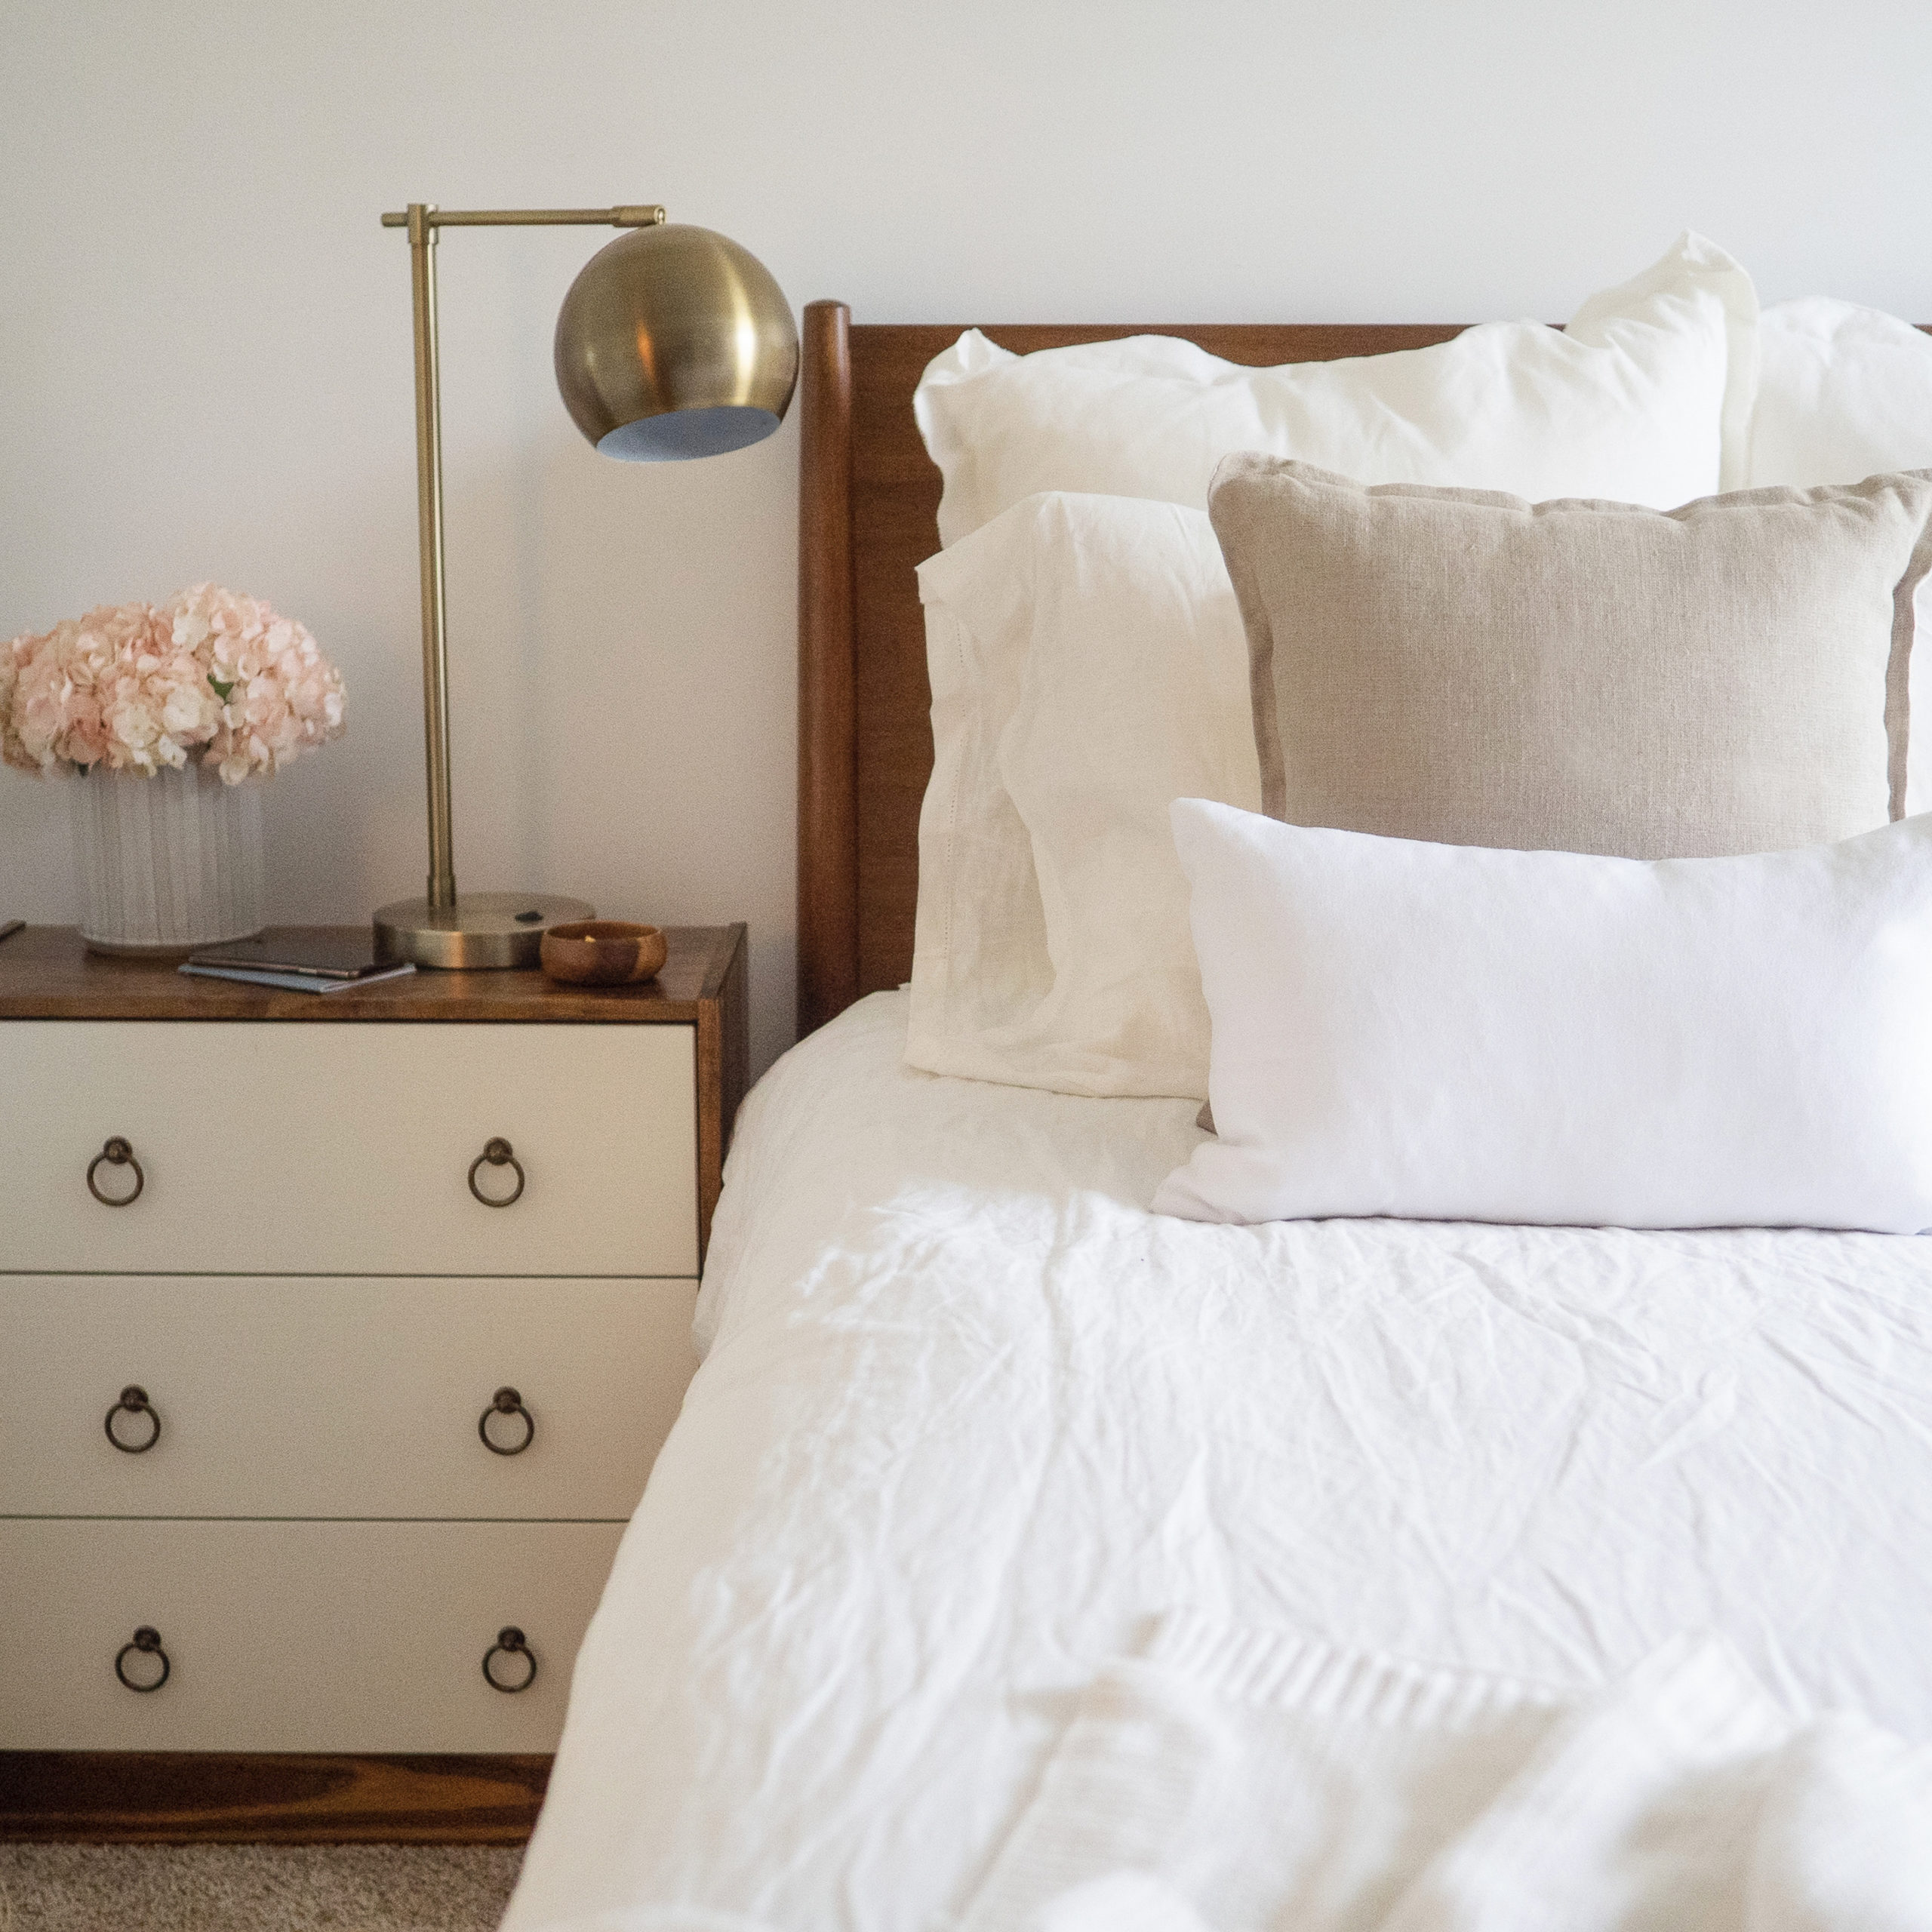 a bed made with white sheets and comforter